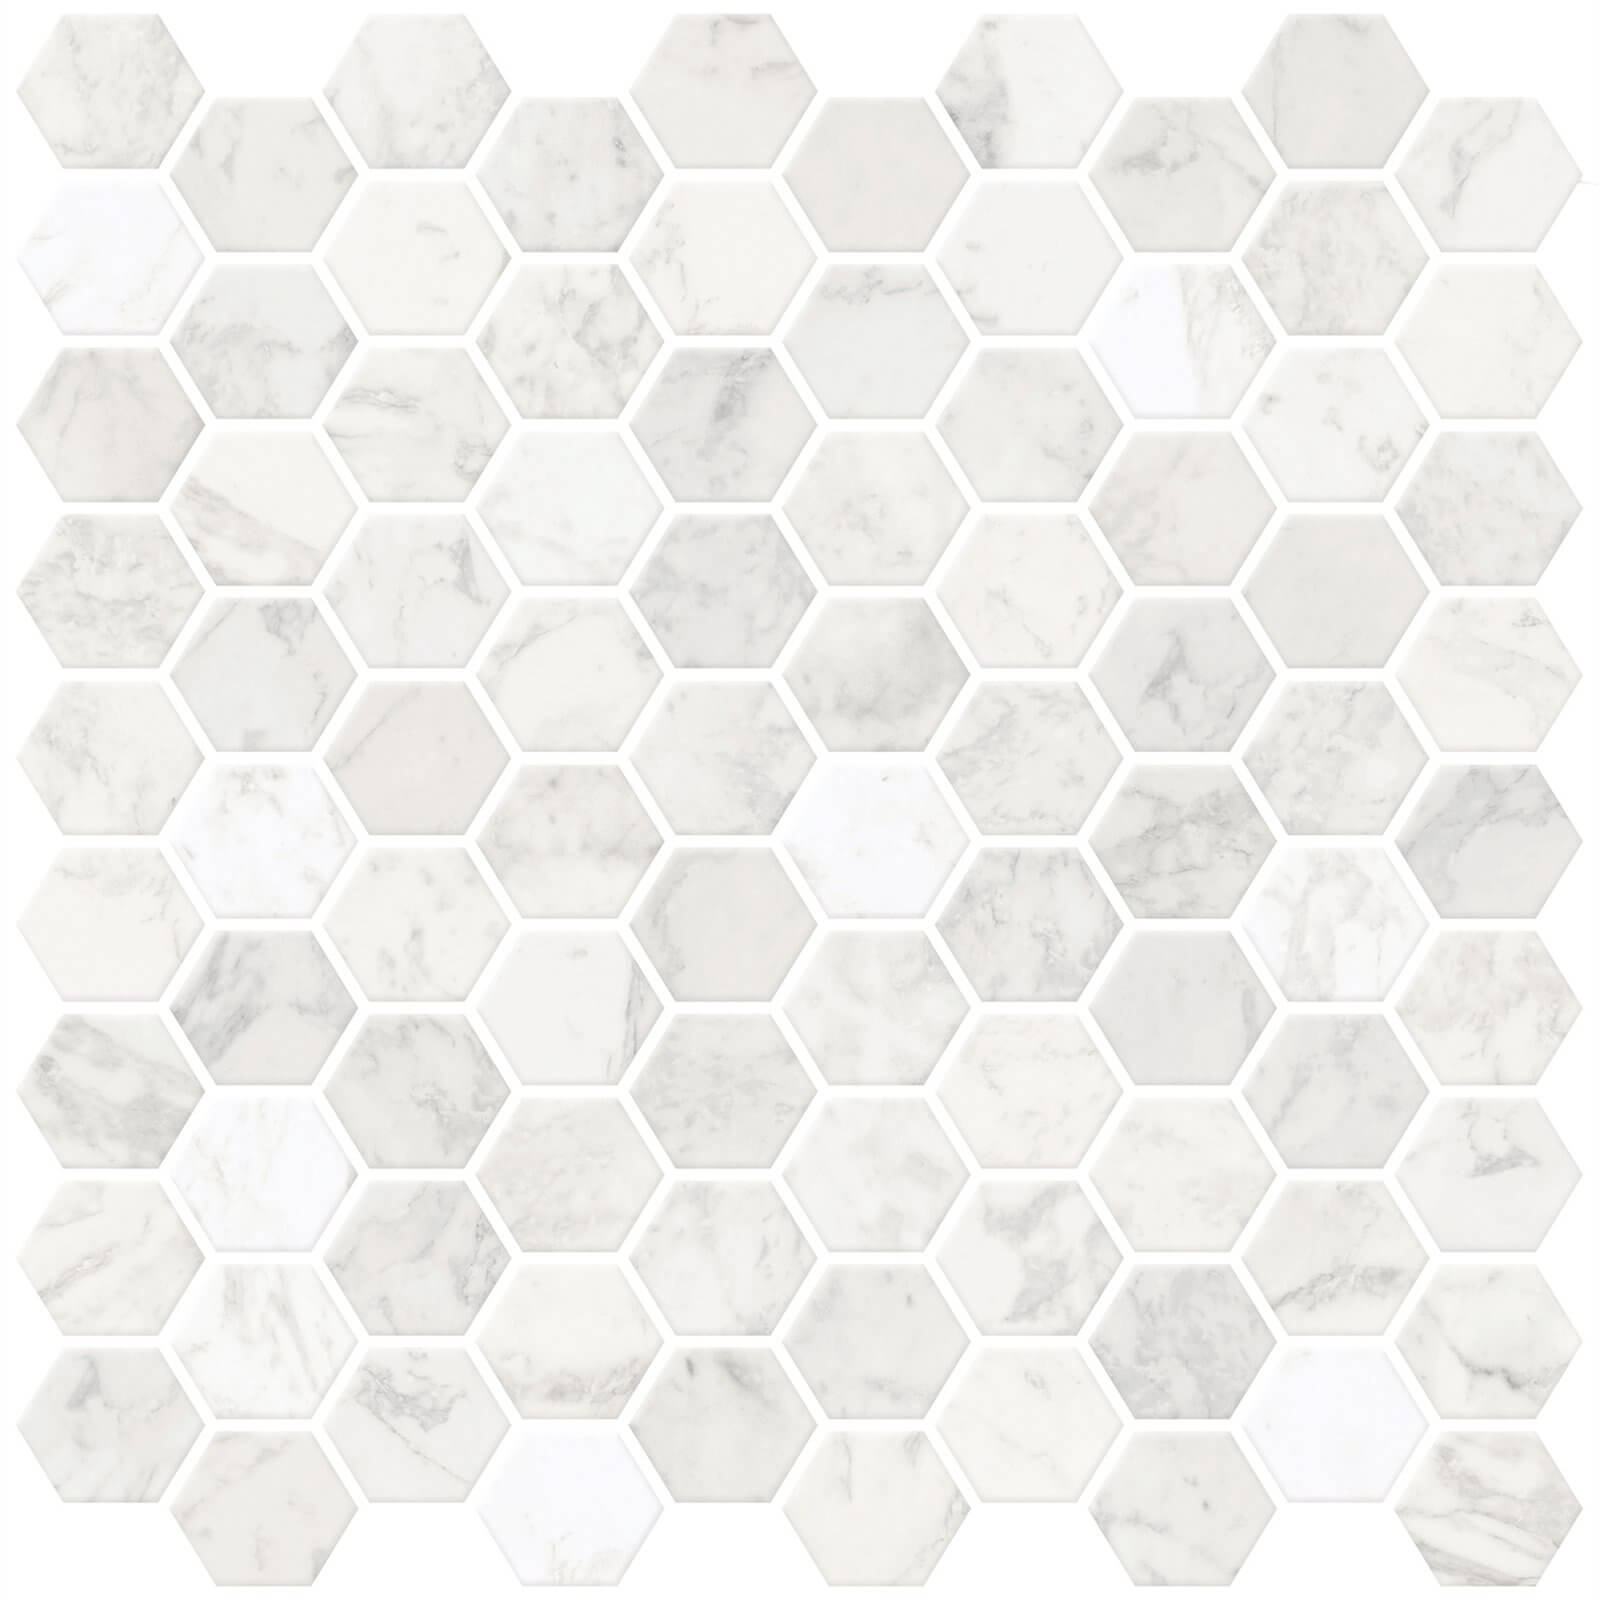 Hexagon Marble Peel and Stick Self Adhesive Wall Tiles - 0.25 sqm Pack